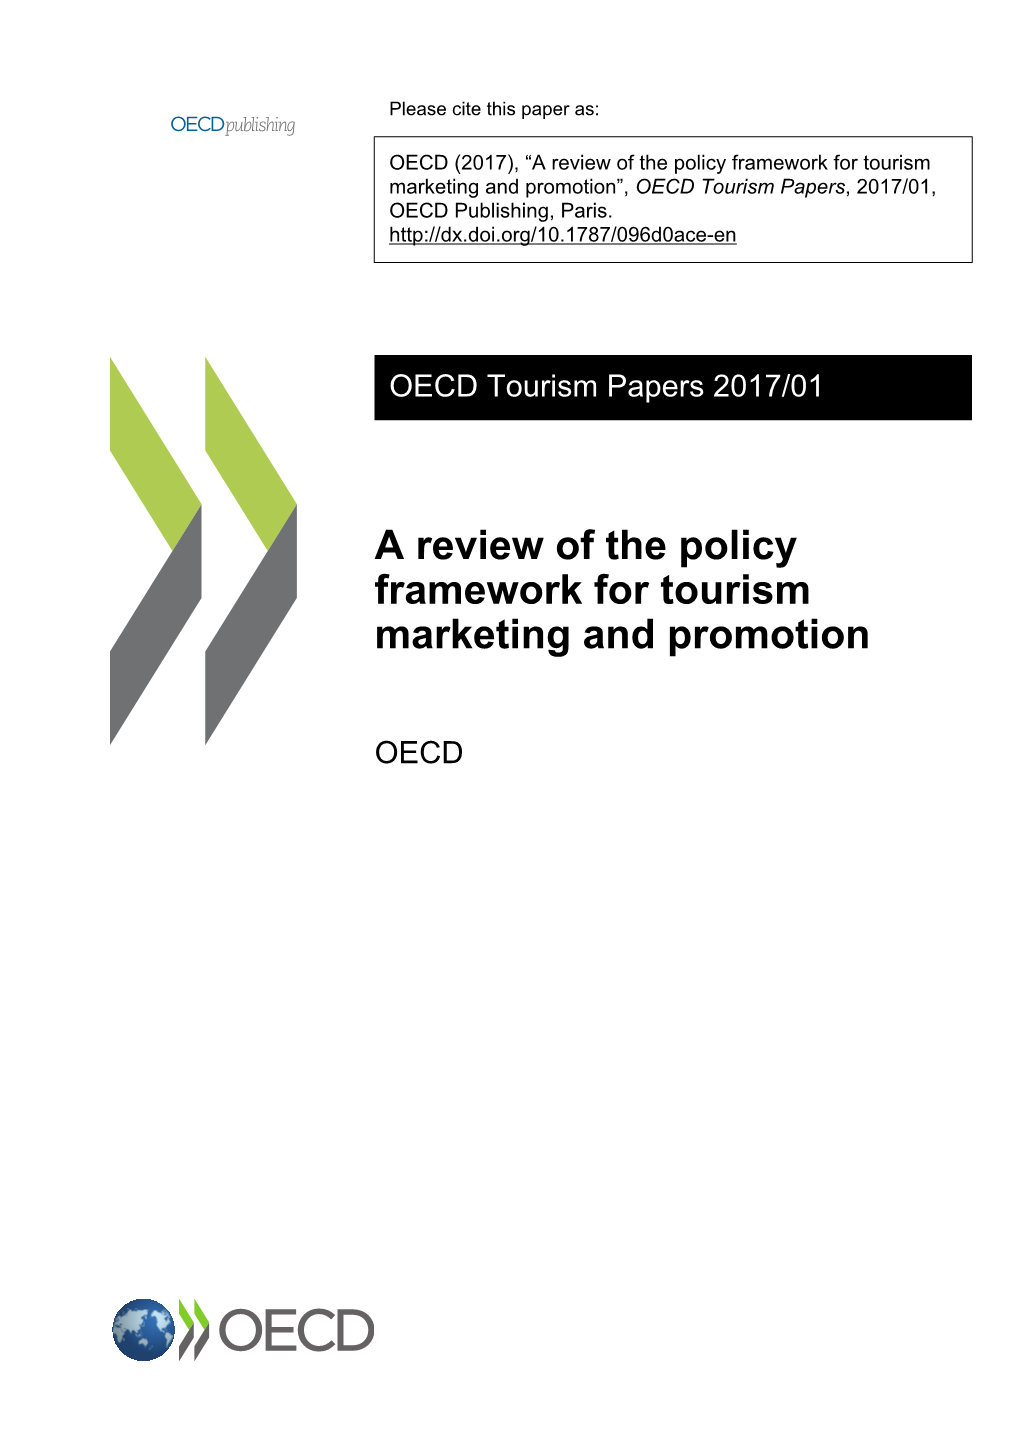 A Review of the Policy Framework for Tourism Marketing and Promotion”, OECD Tourism Papers, 2017/01, OECD Publishing, Paris